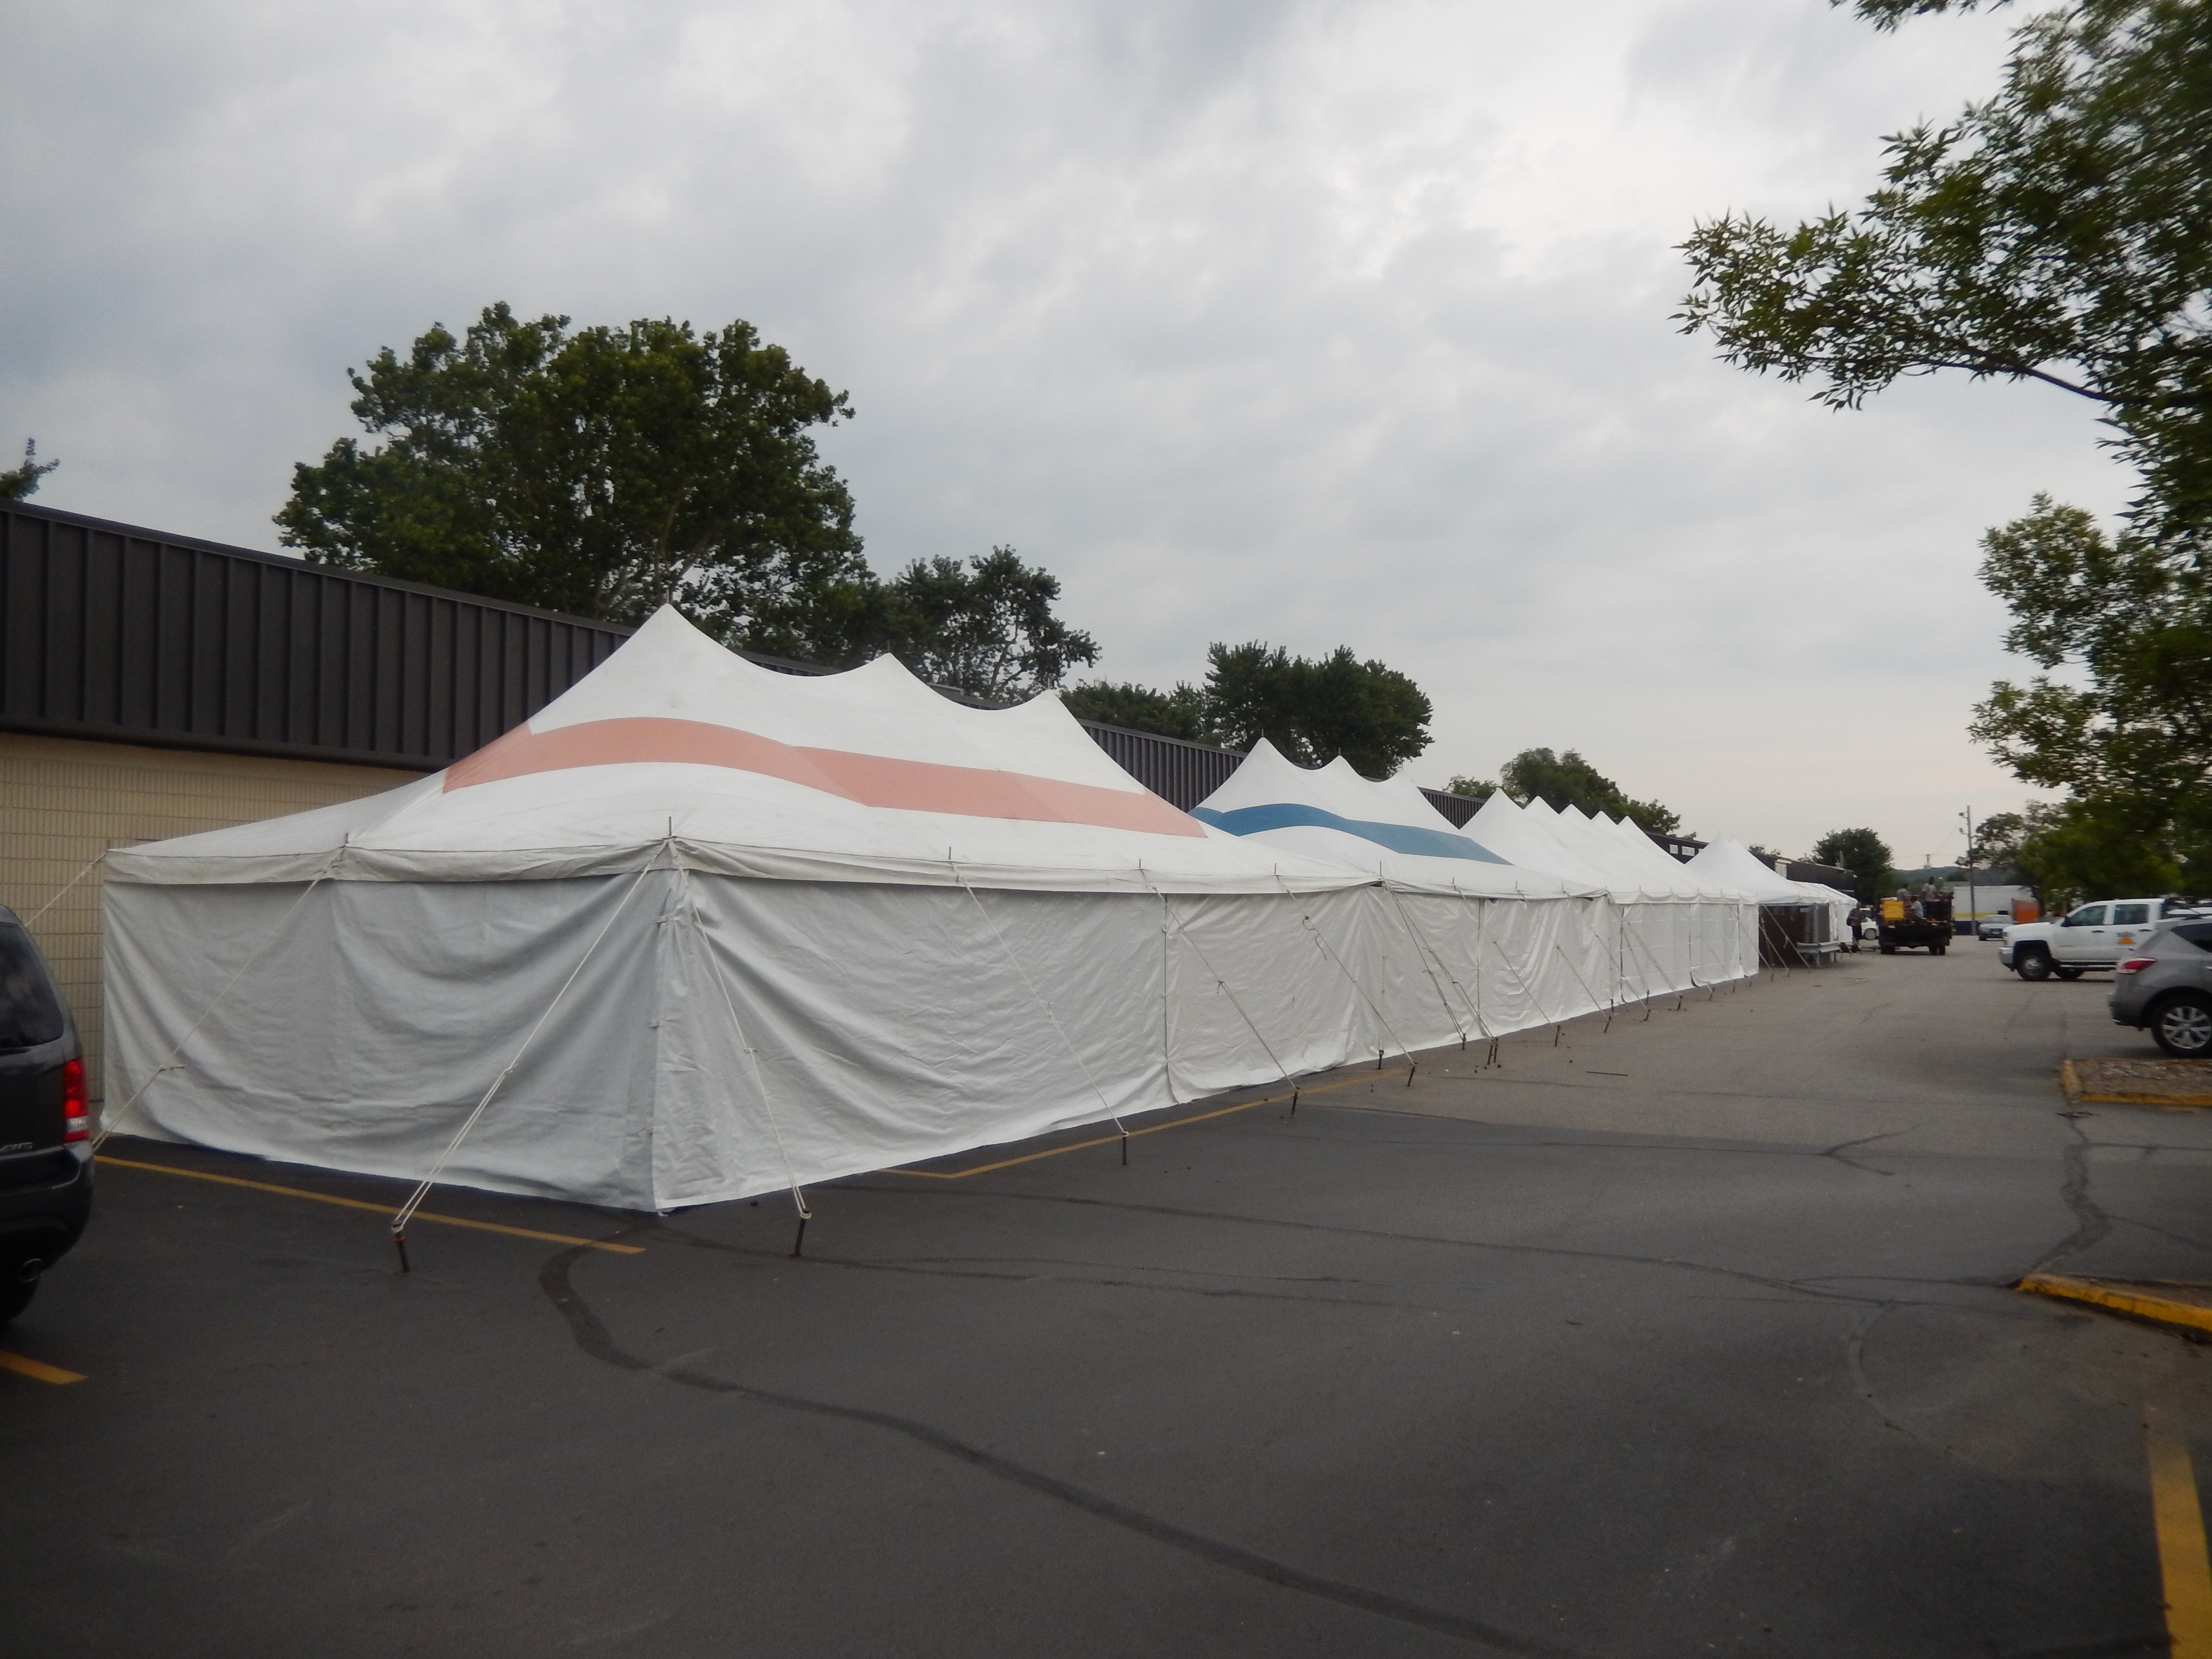 clearance tents